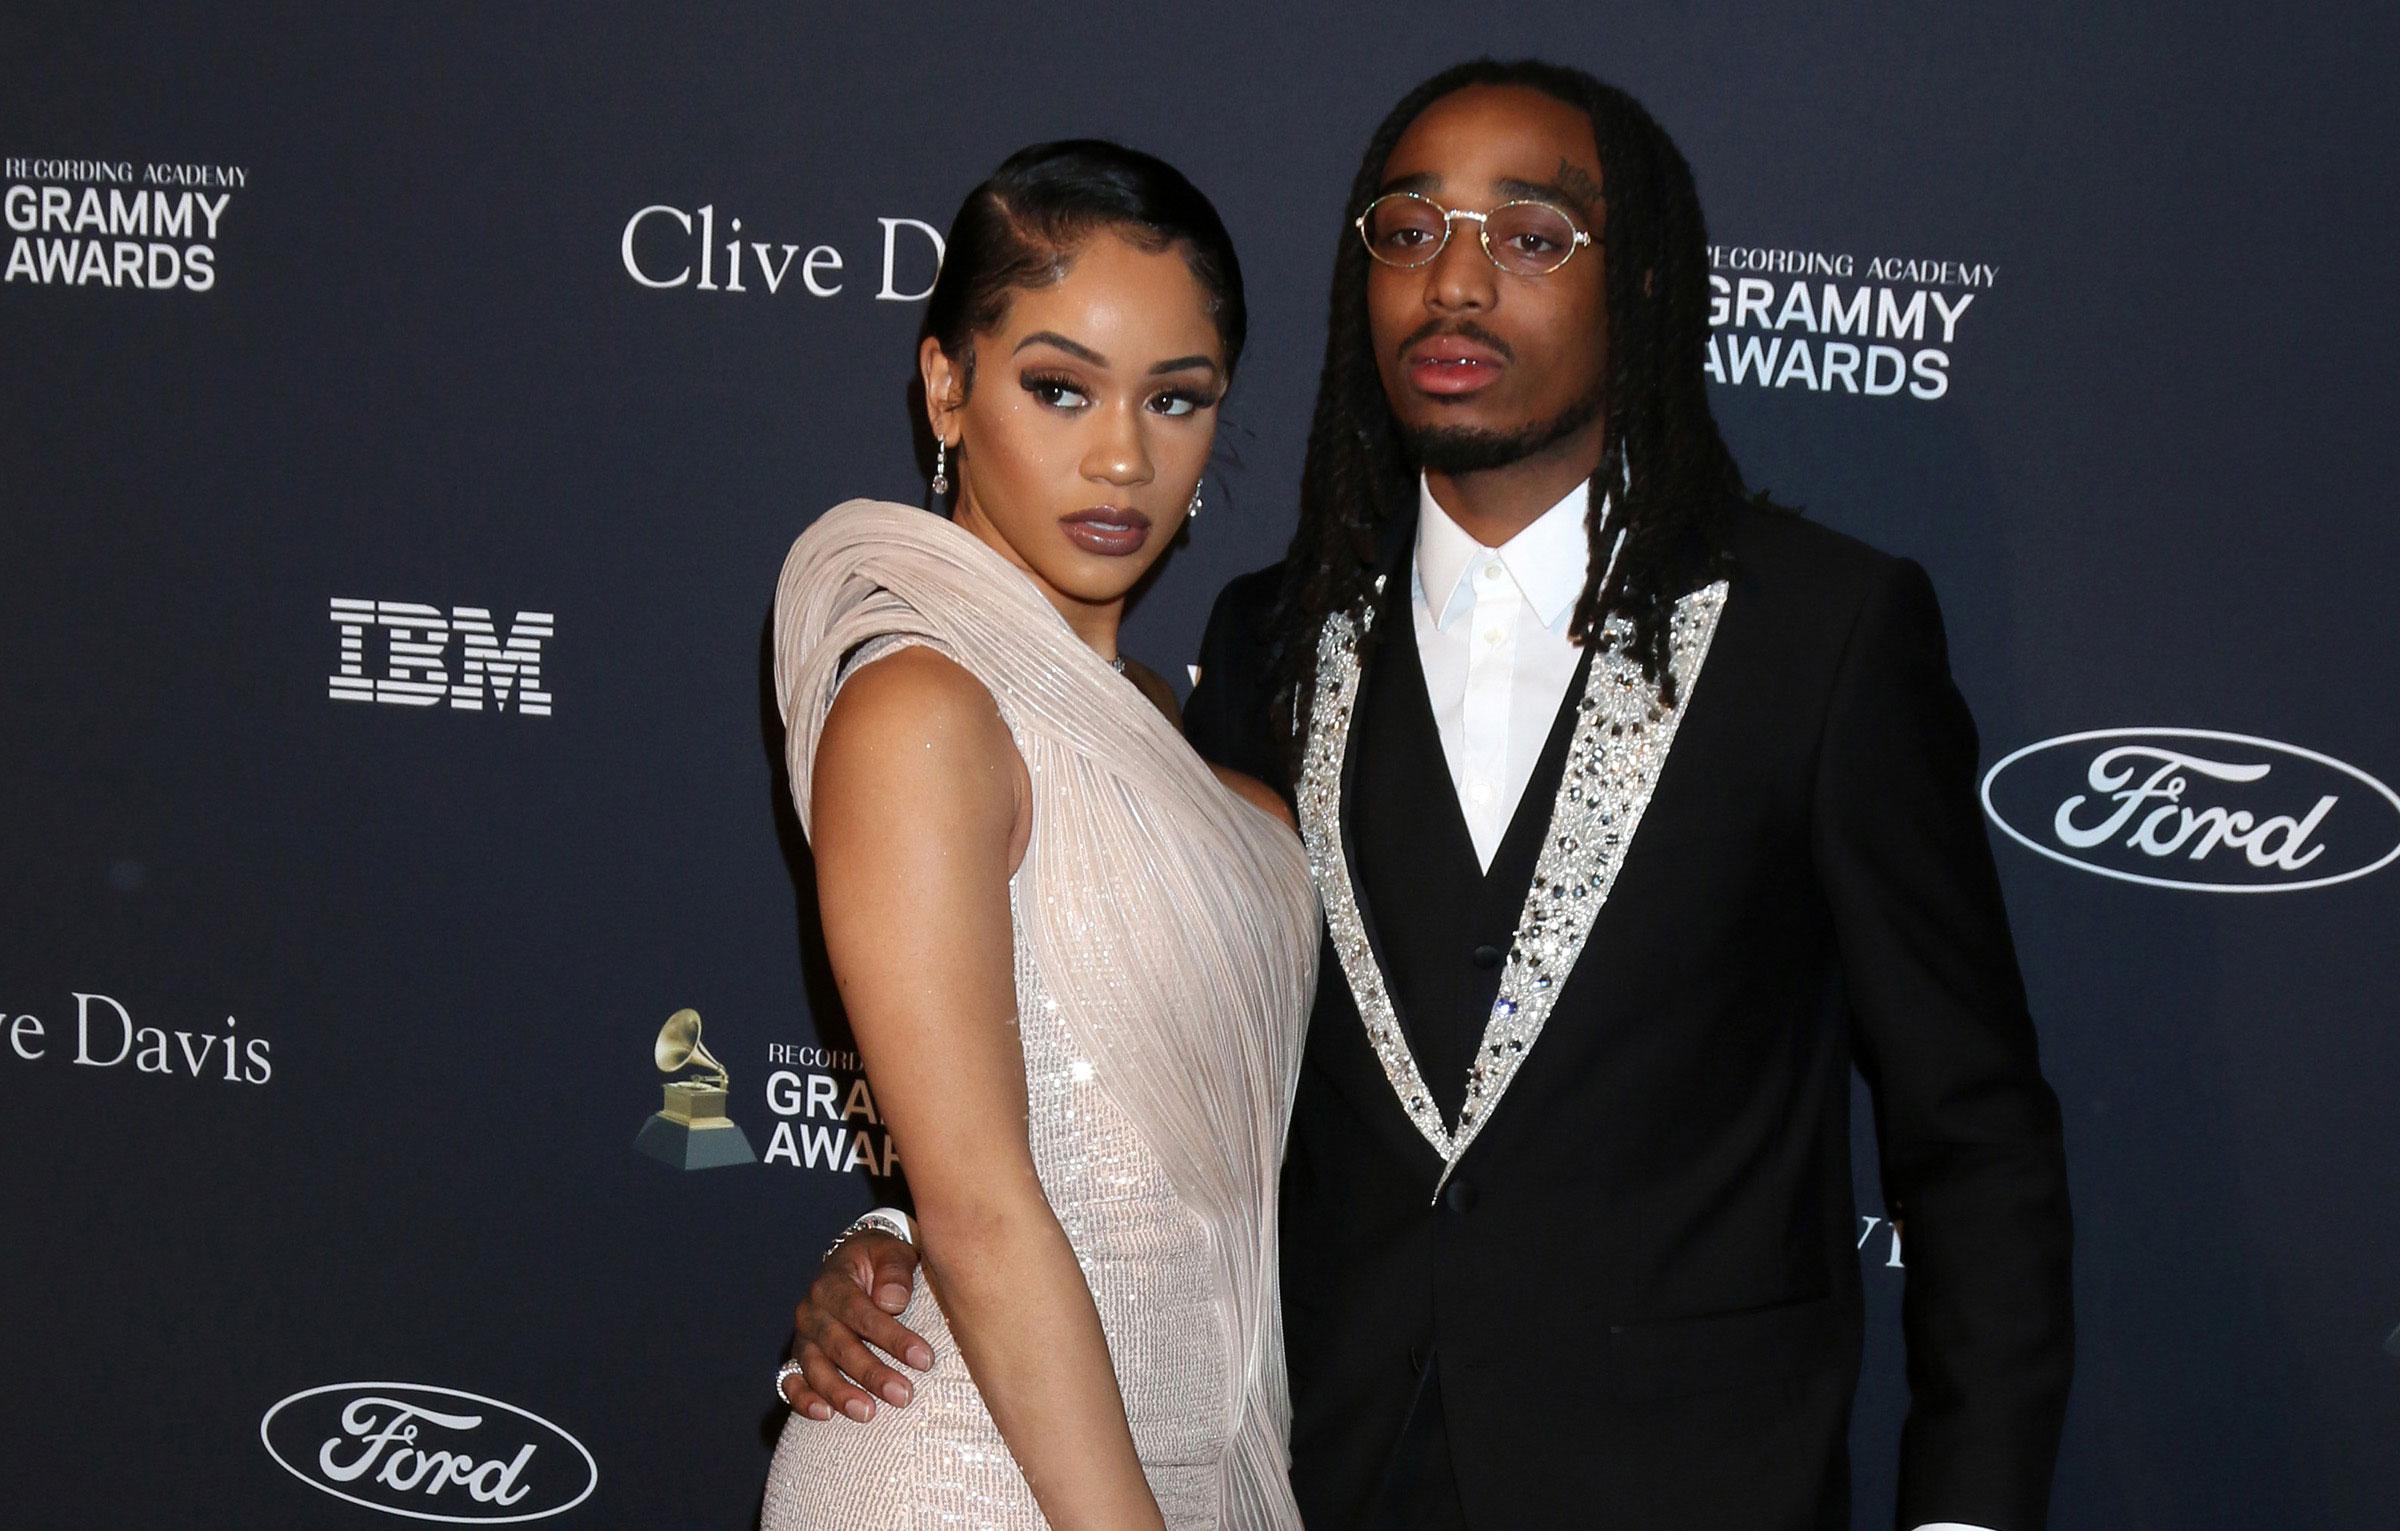 What happened between Offset and Quavo? Beef claim explored as former  addresses report of Grammys fight